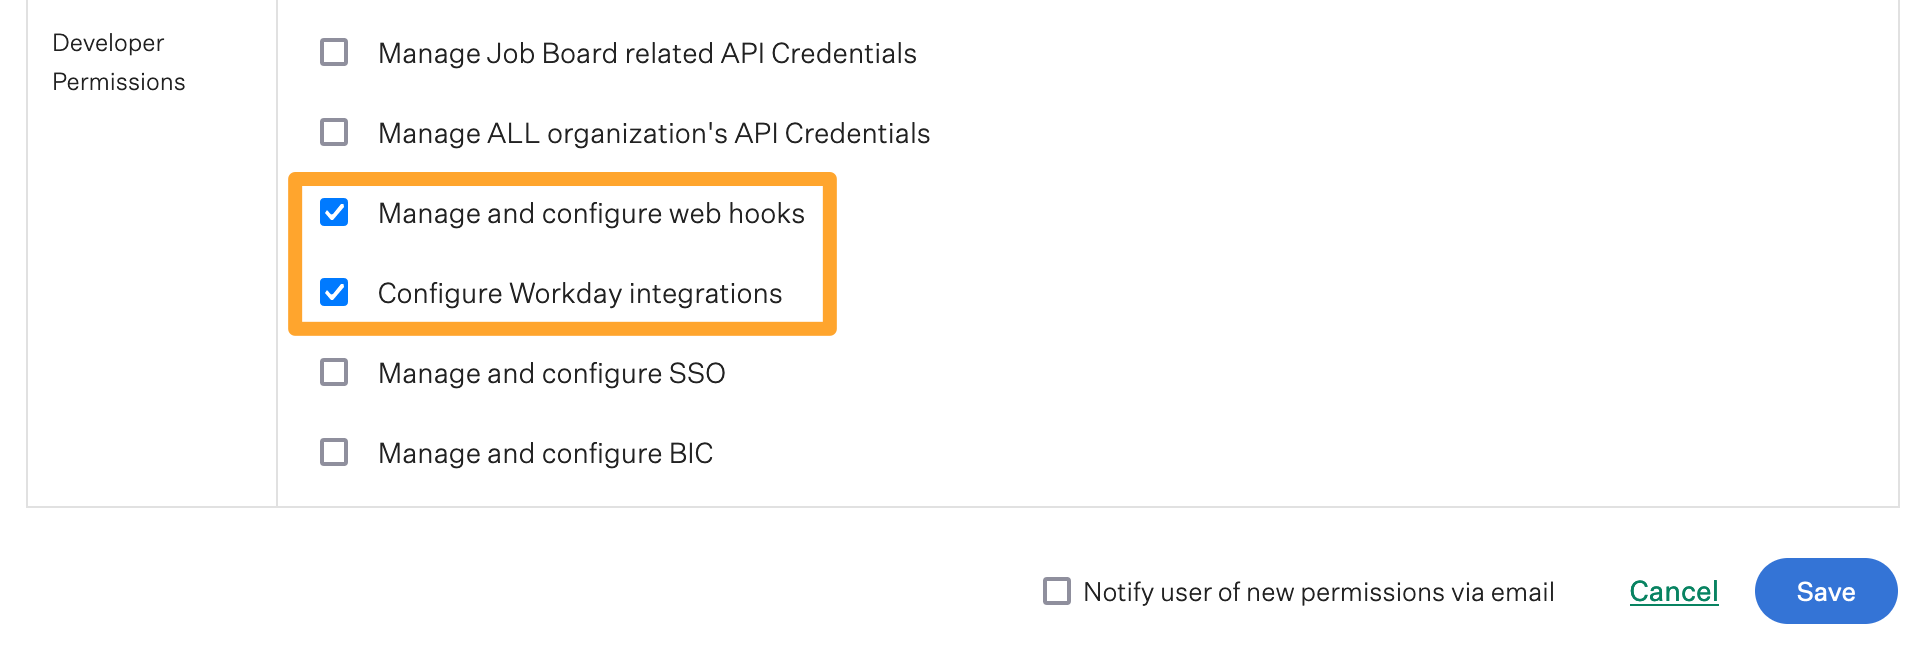 Developer specific permissions are shown in Greenhouse Recruiting, including can manage and configure webhooks and can configure Workday®️ integrations